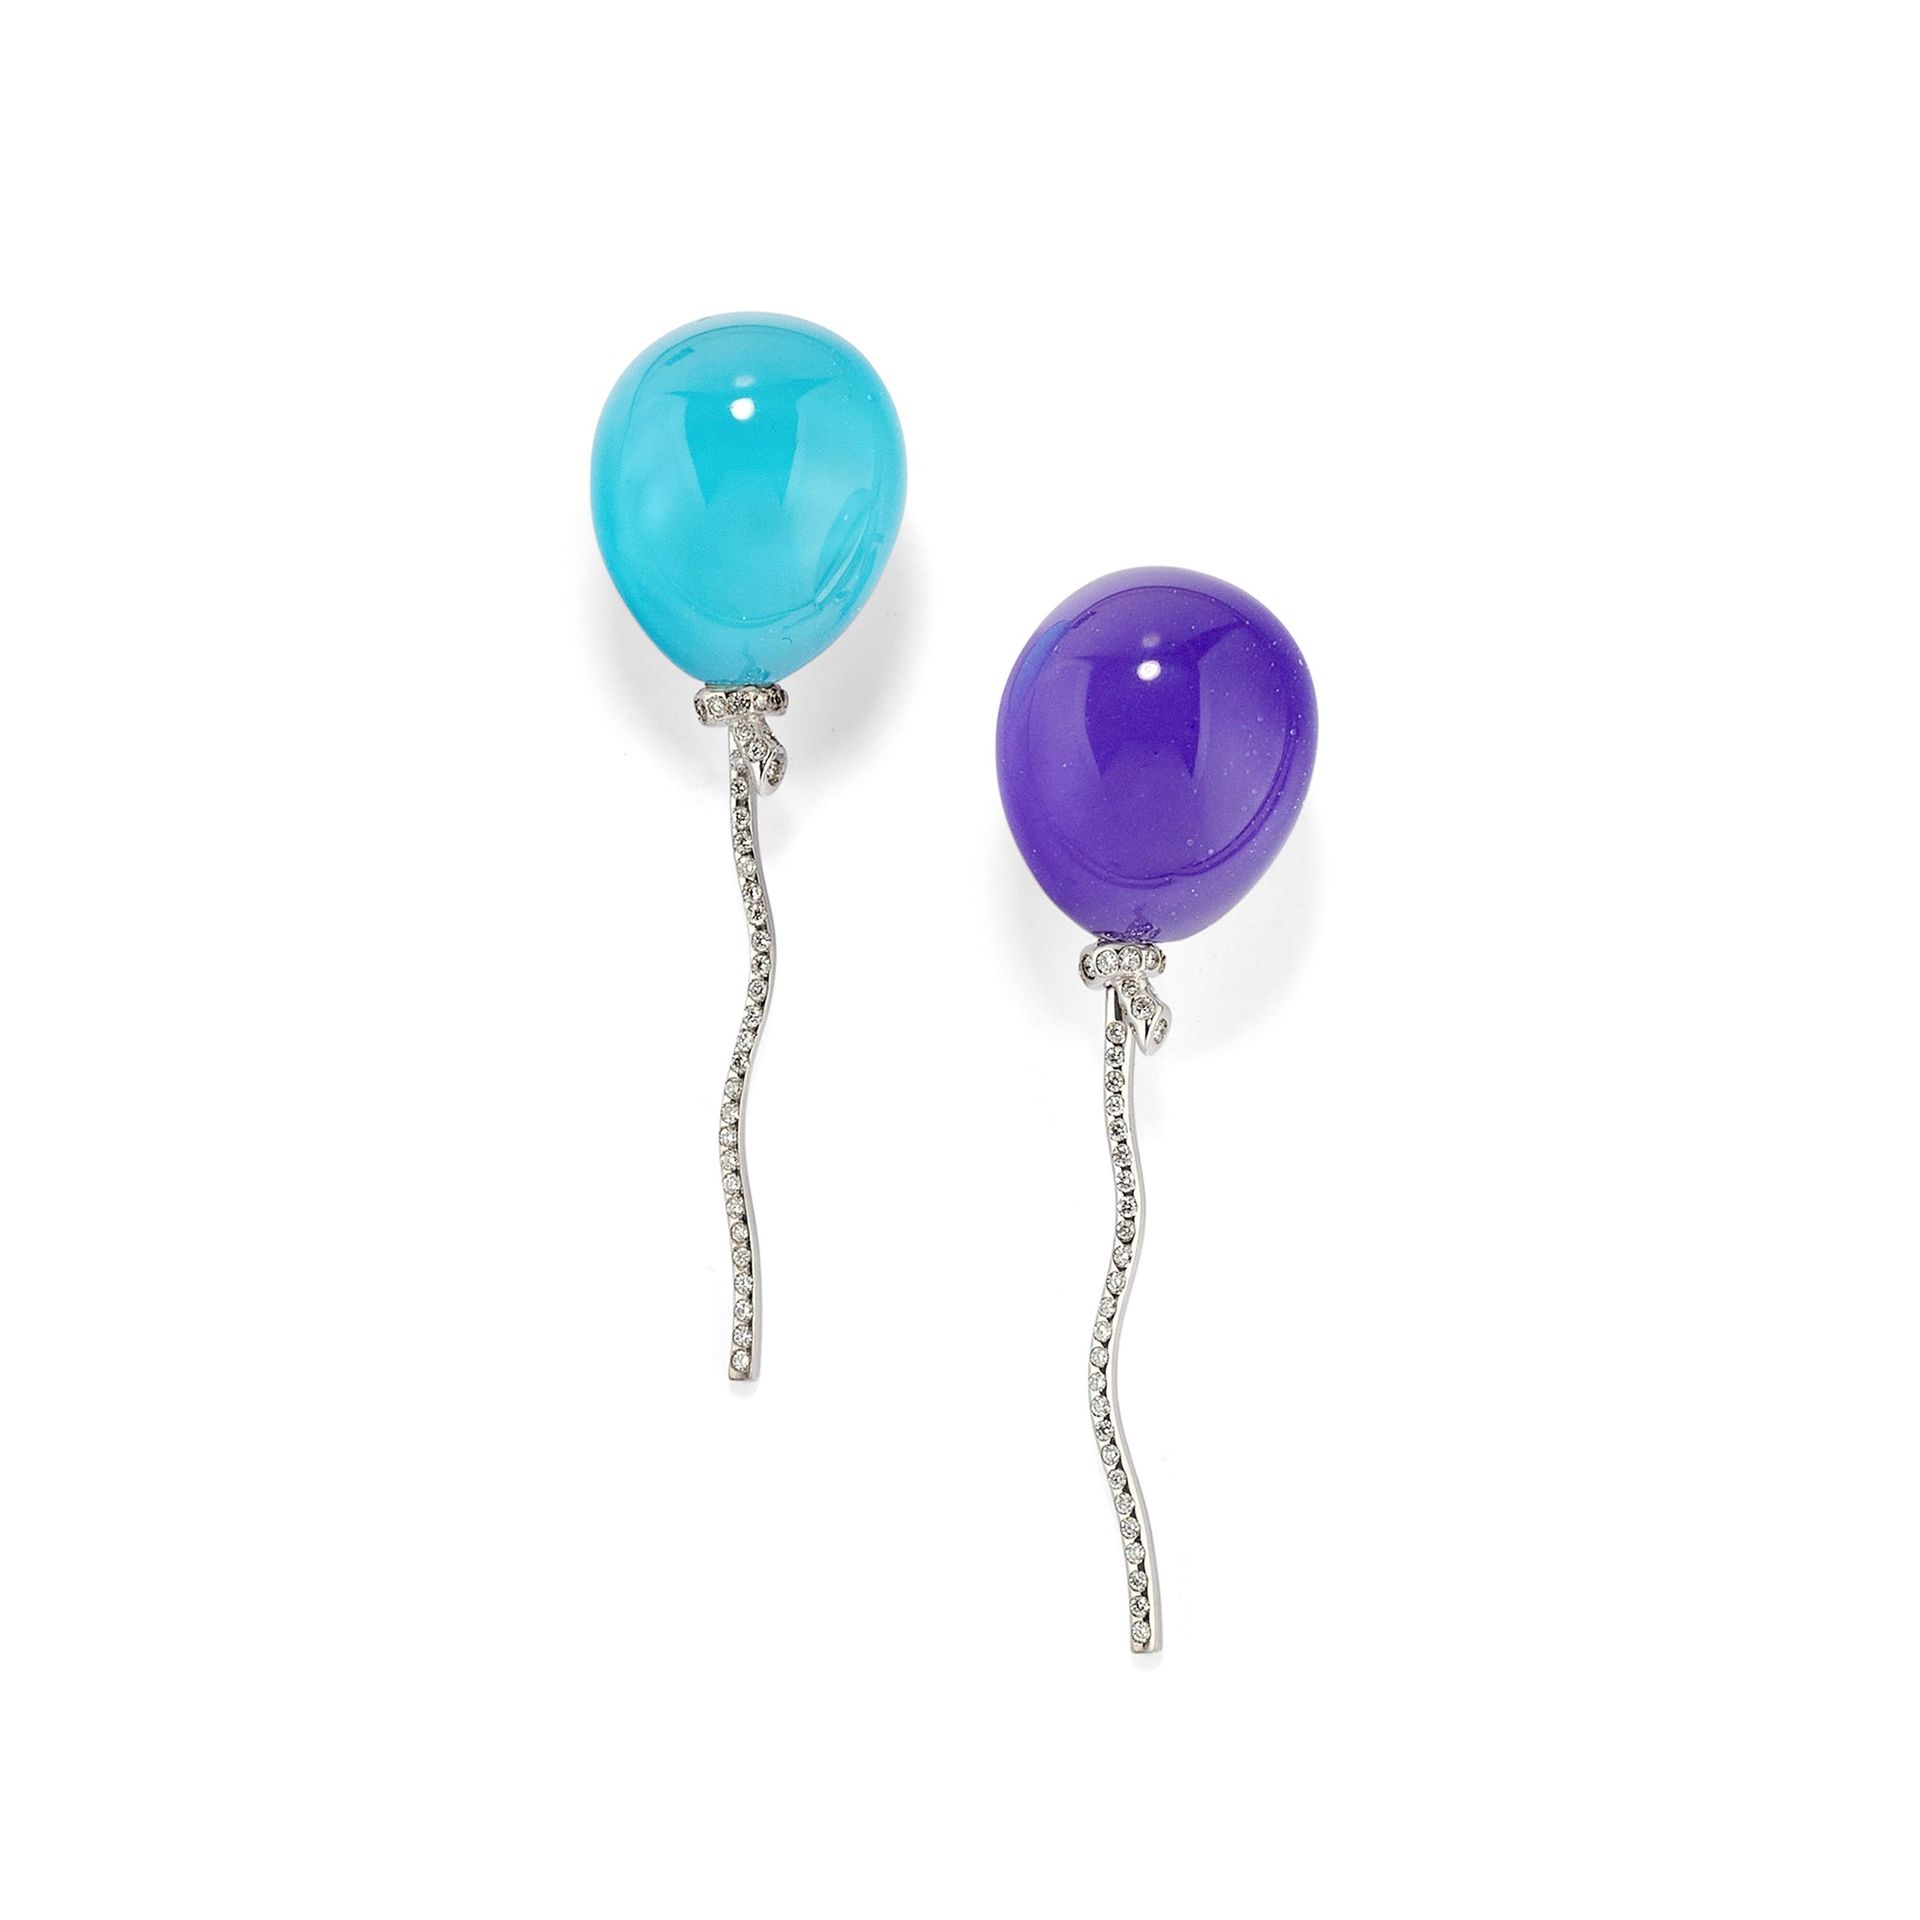 VHERNIER A 18K white gold and colored stone earrings, Baloons collection, Vherni&hellip;